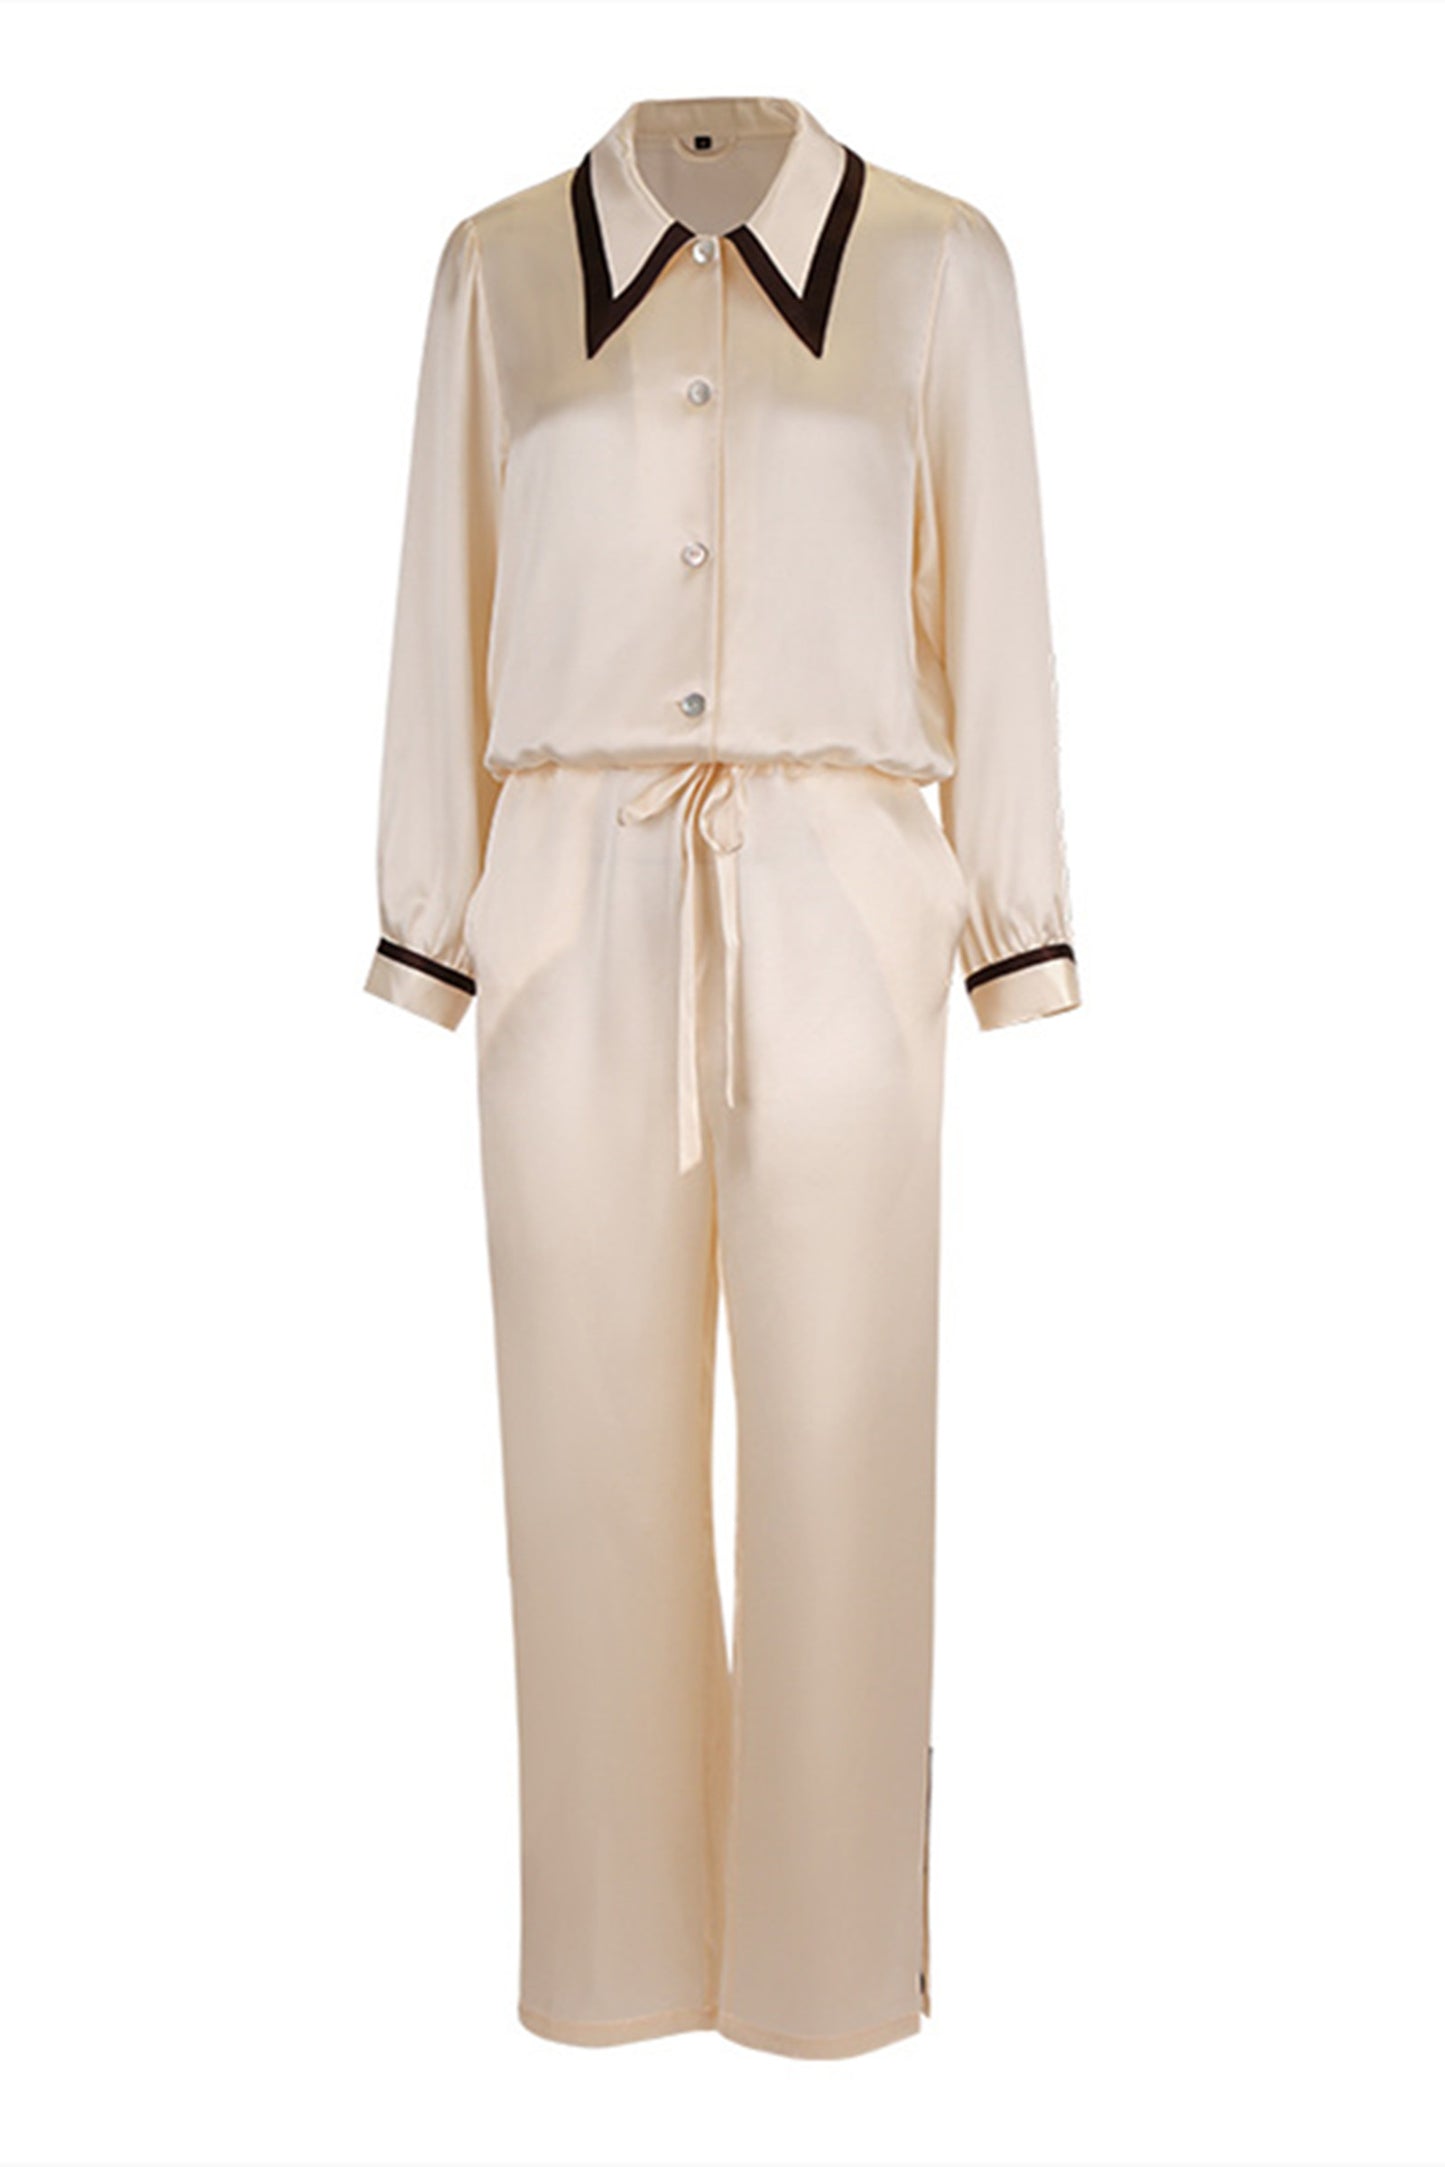 Silk Pajama Set for Outer Wear